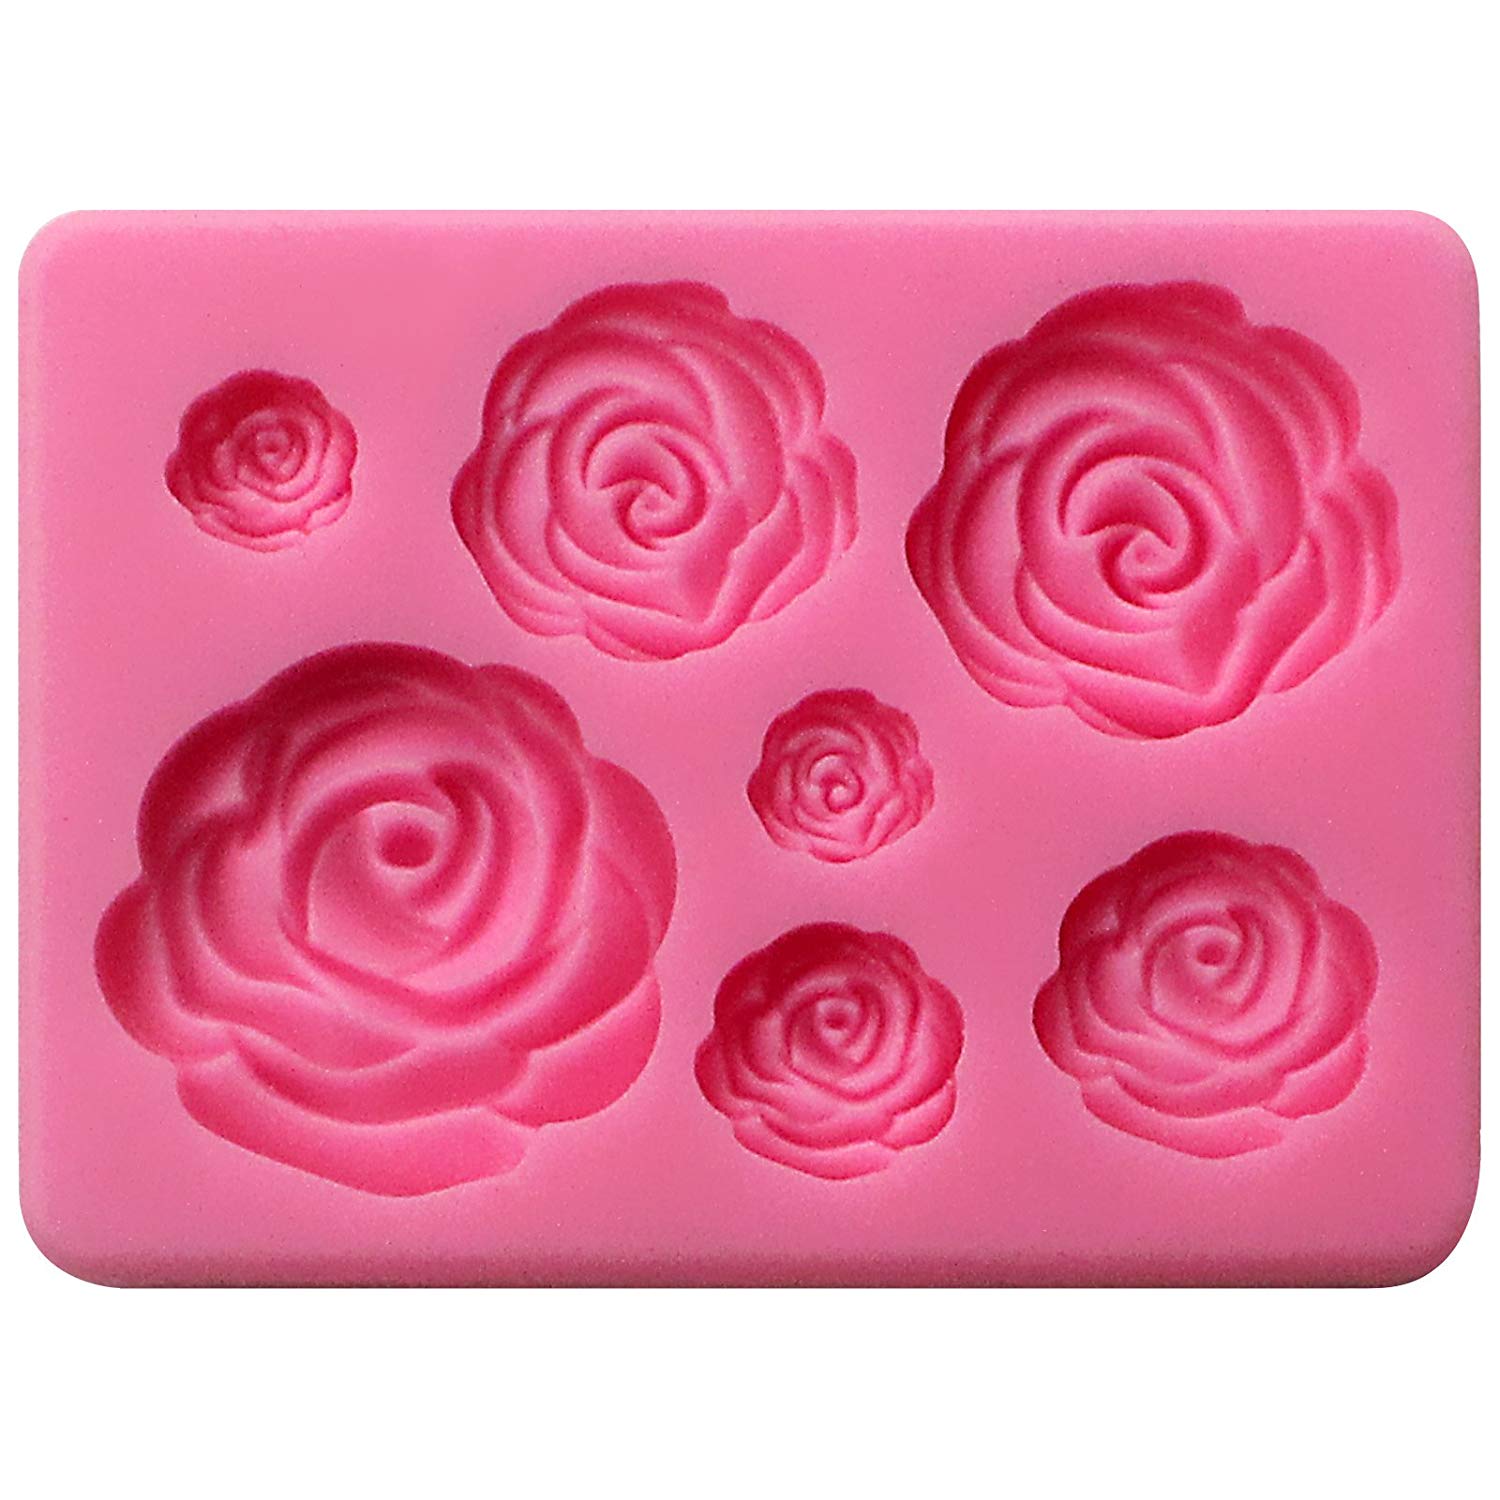 Assorted Flowers Silicone Mold each in a different shape